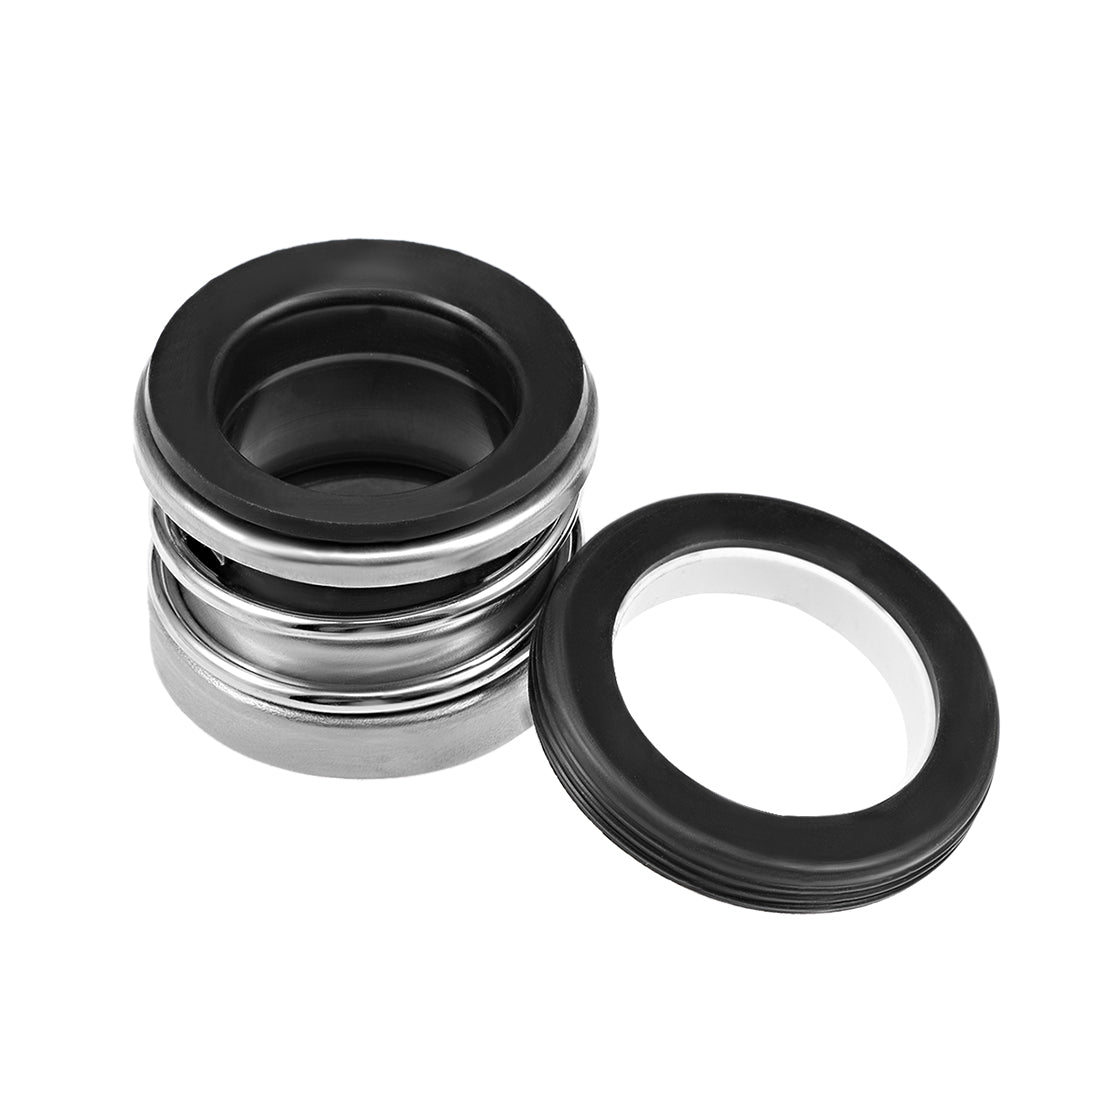 uxcell Uxcell Mechanical Shaft Seal Replacement for Pool Spa Pump 104-30